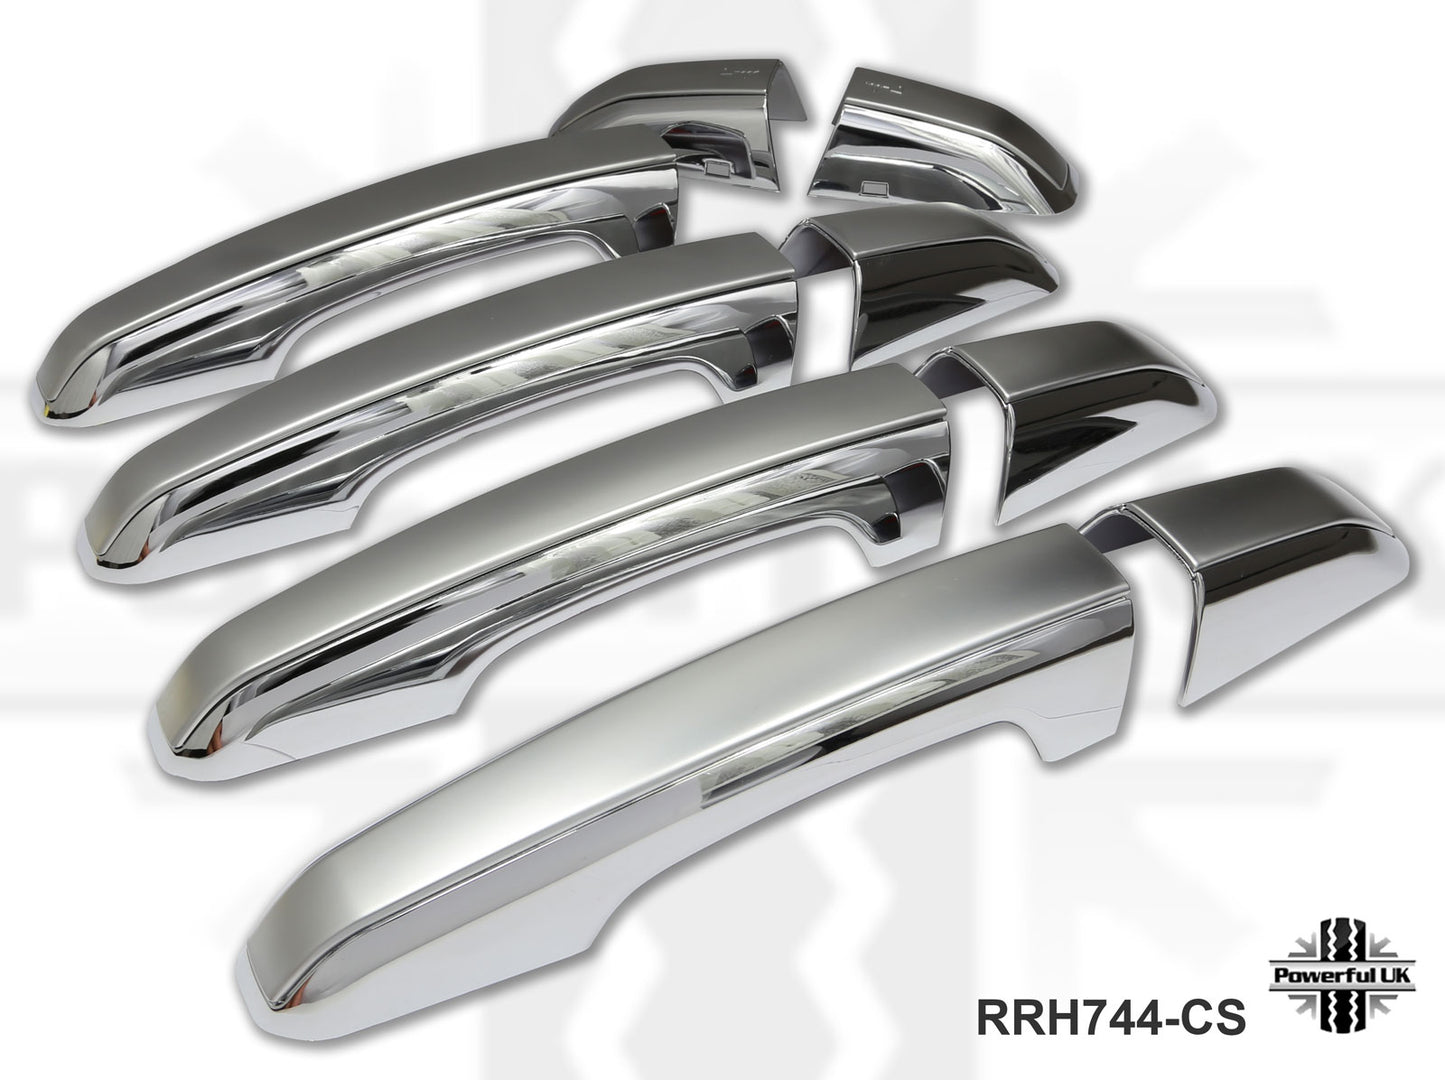 2pc "Autobiography Style" Door Handle Covers for Range Rover Evoque L538 - Chrome/Silver